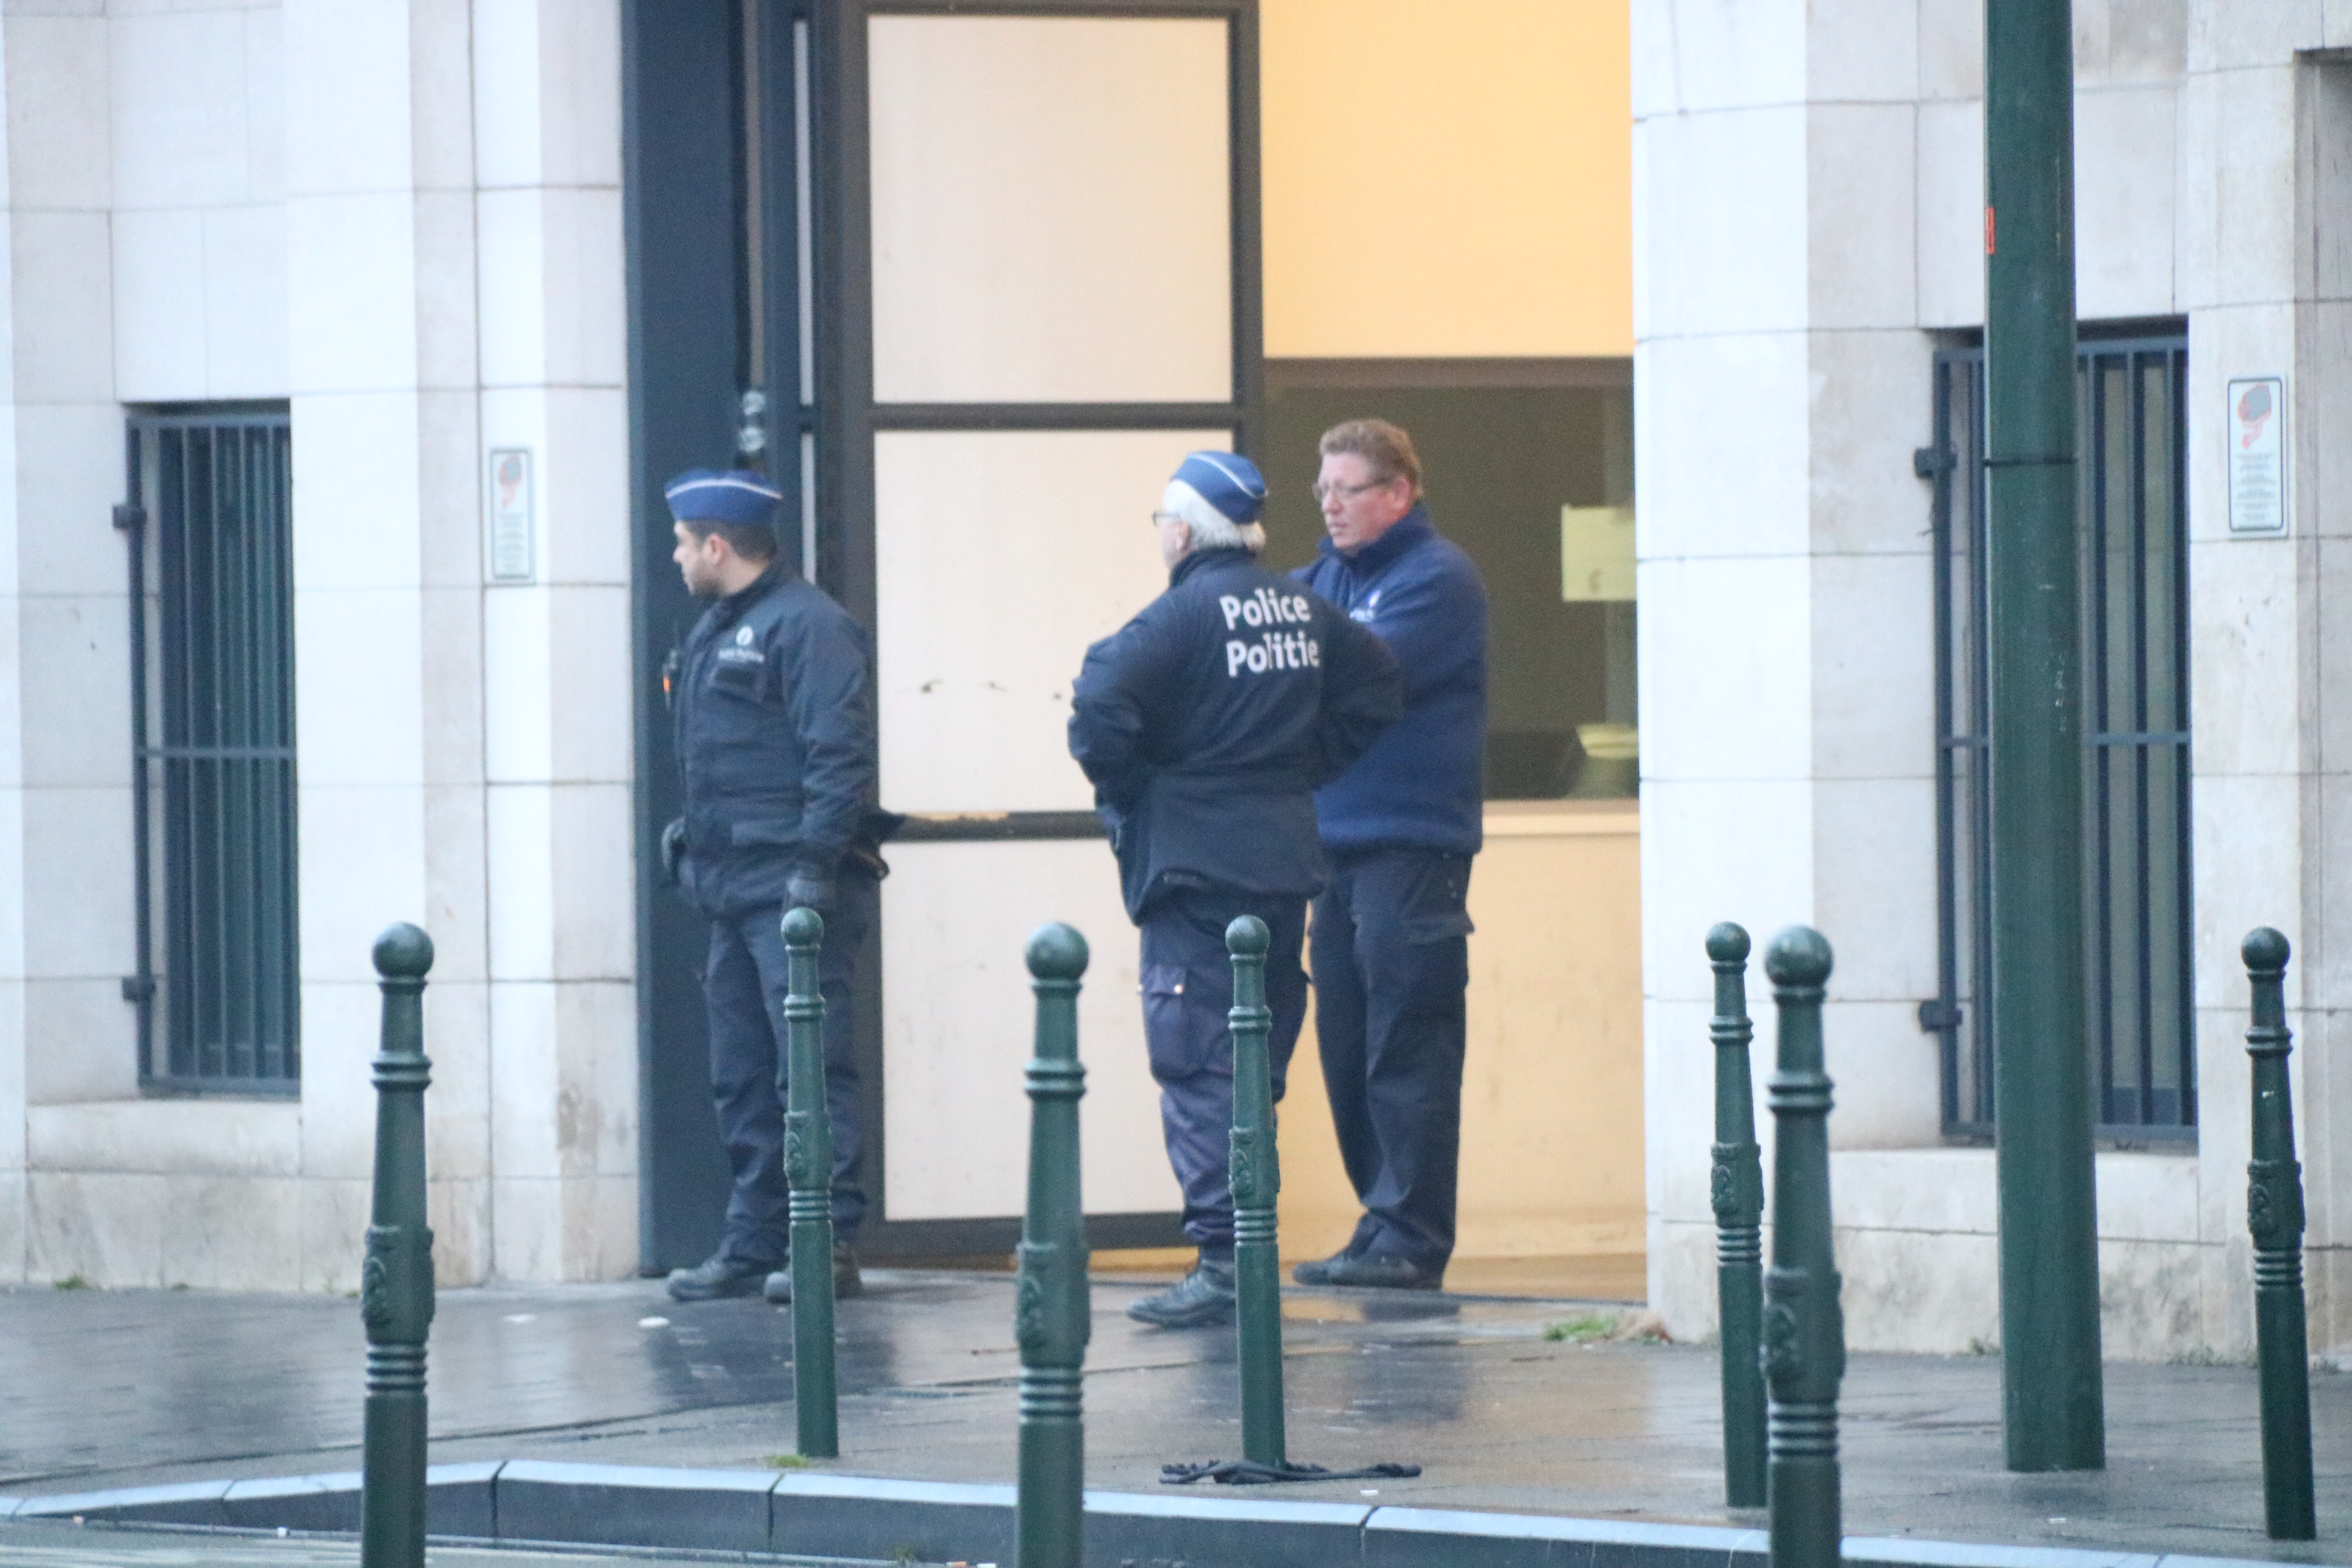 Some policemen outside the Belgian Palais de Justice, in Brussels (by Nazaret Romero)